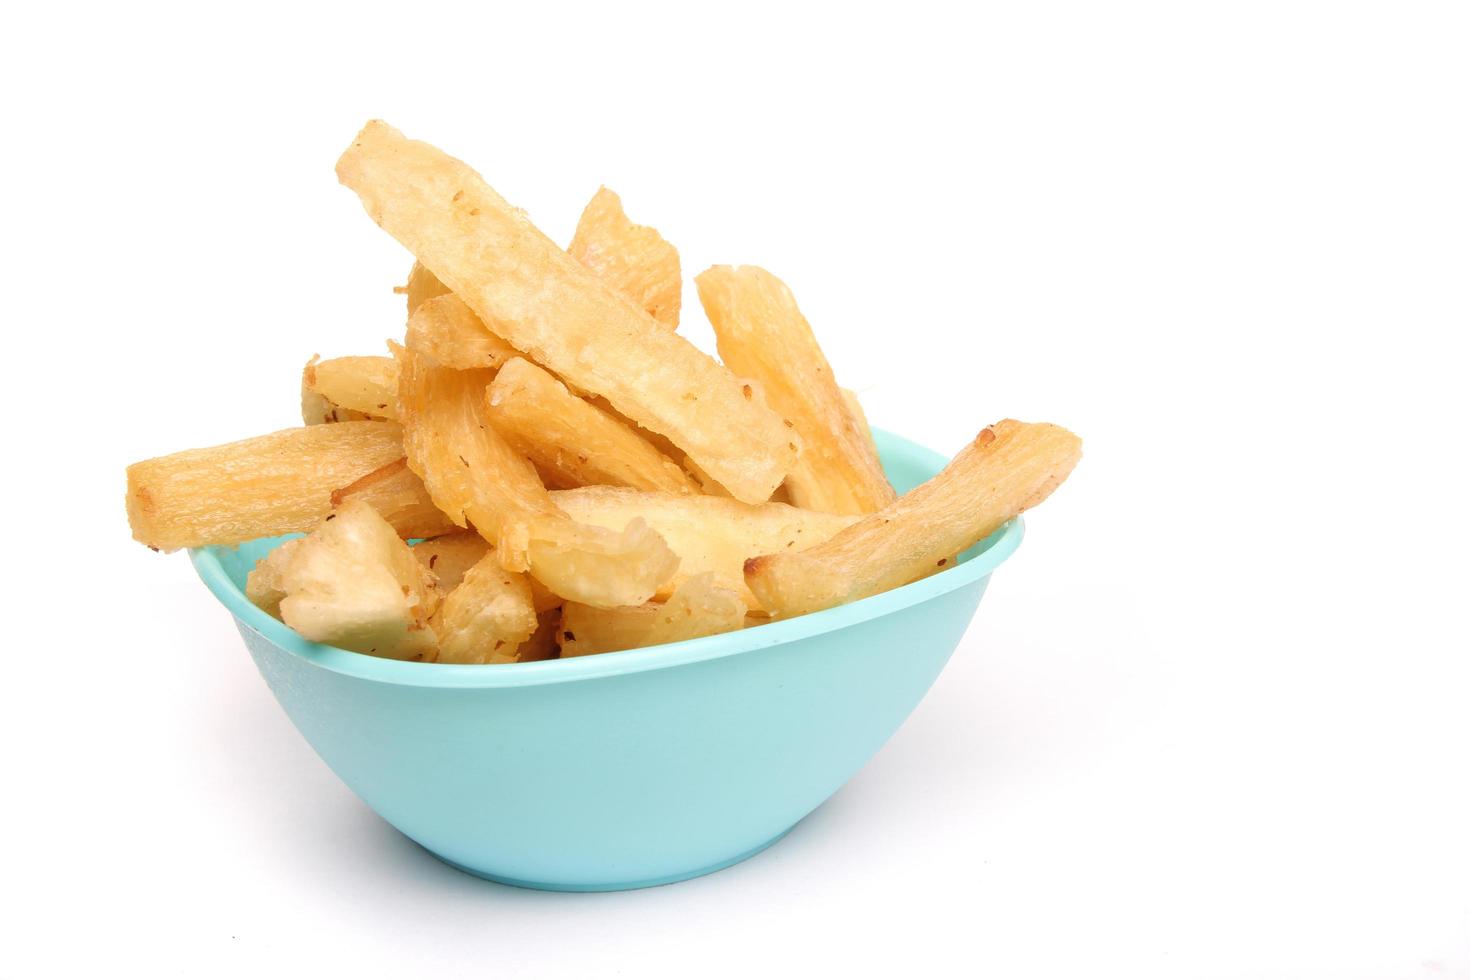 Fried cassava in a blue bowl on a white background, copy space, texture, Indonesian food. photo